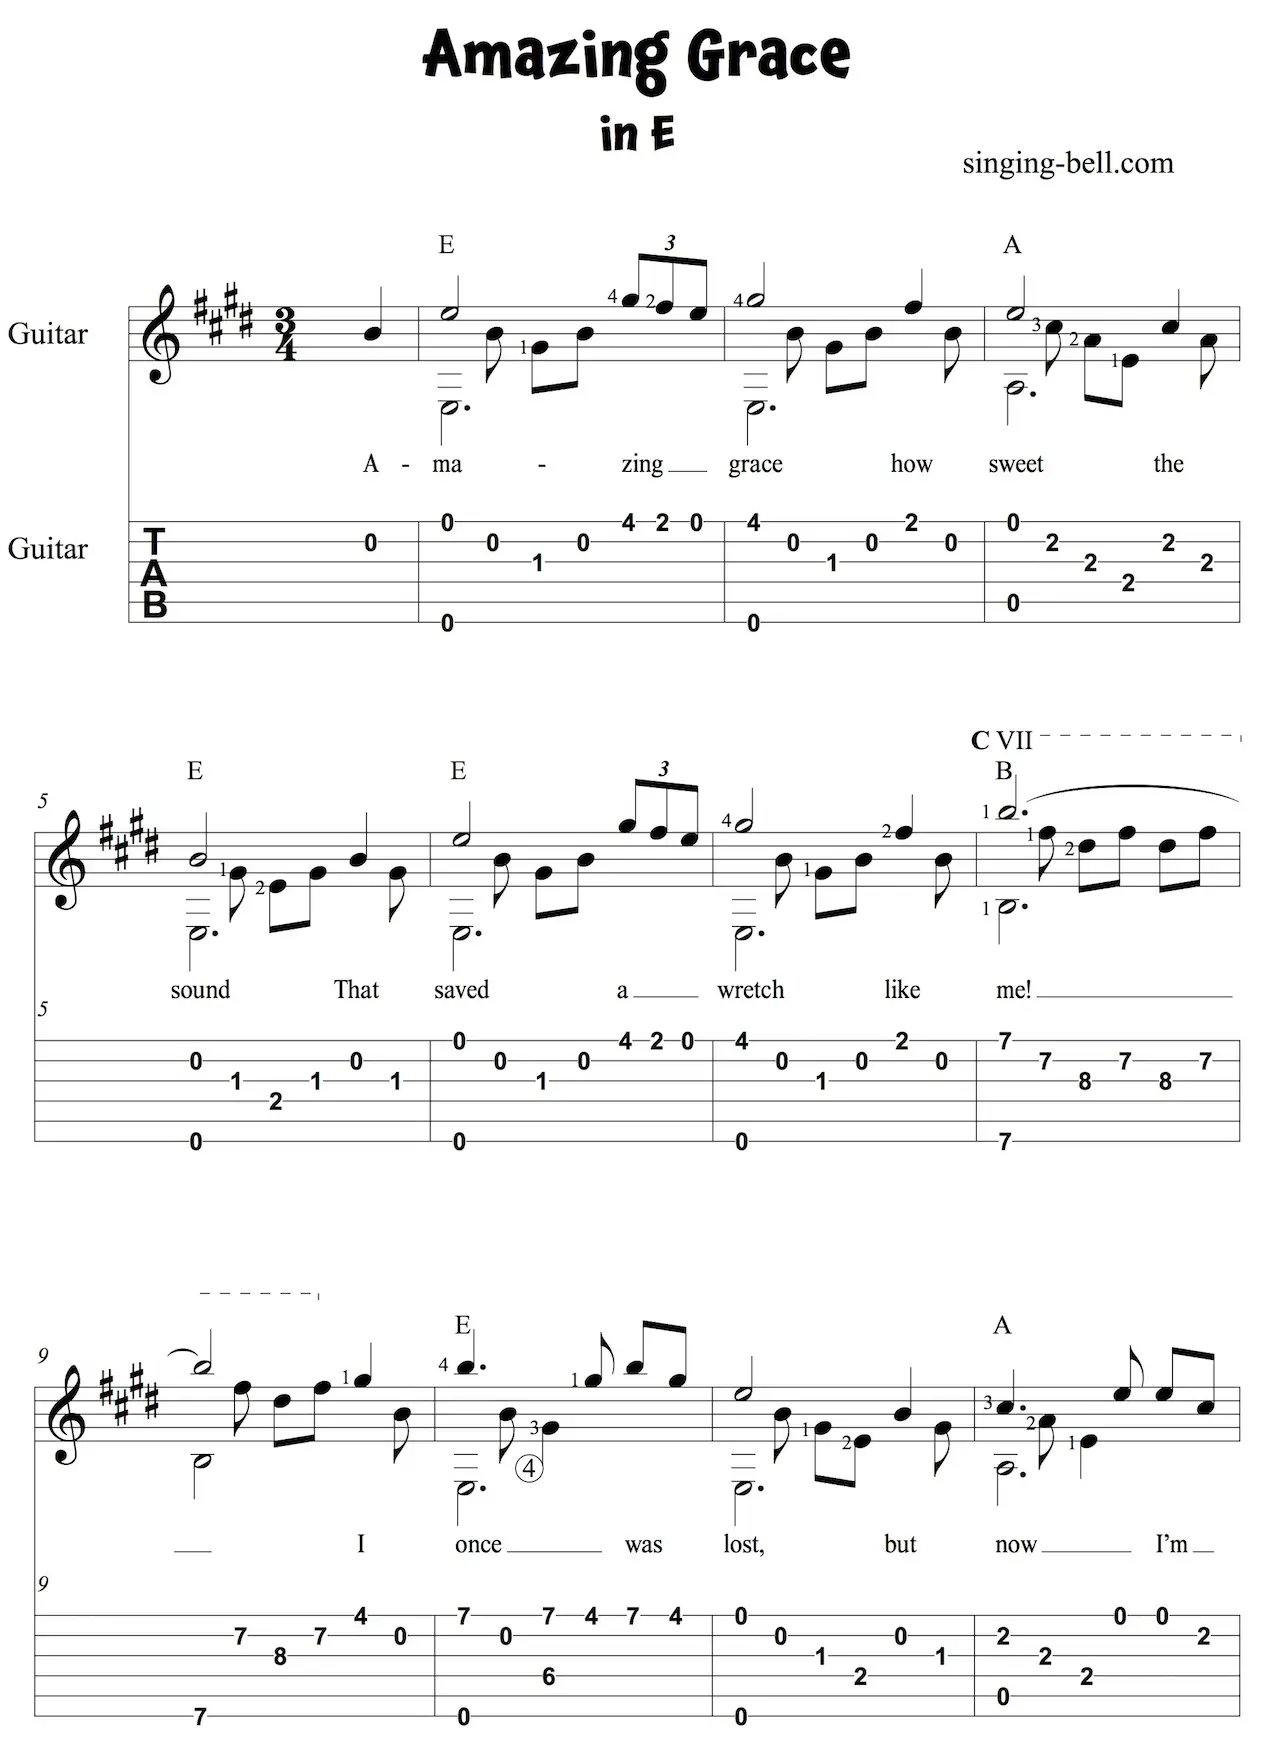 Amazing Grace Easy Guitar Sheet Music with Notes and Tablature in E - page 1.